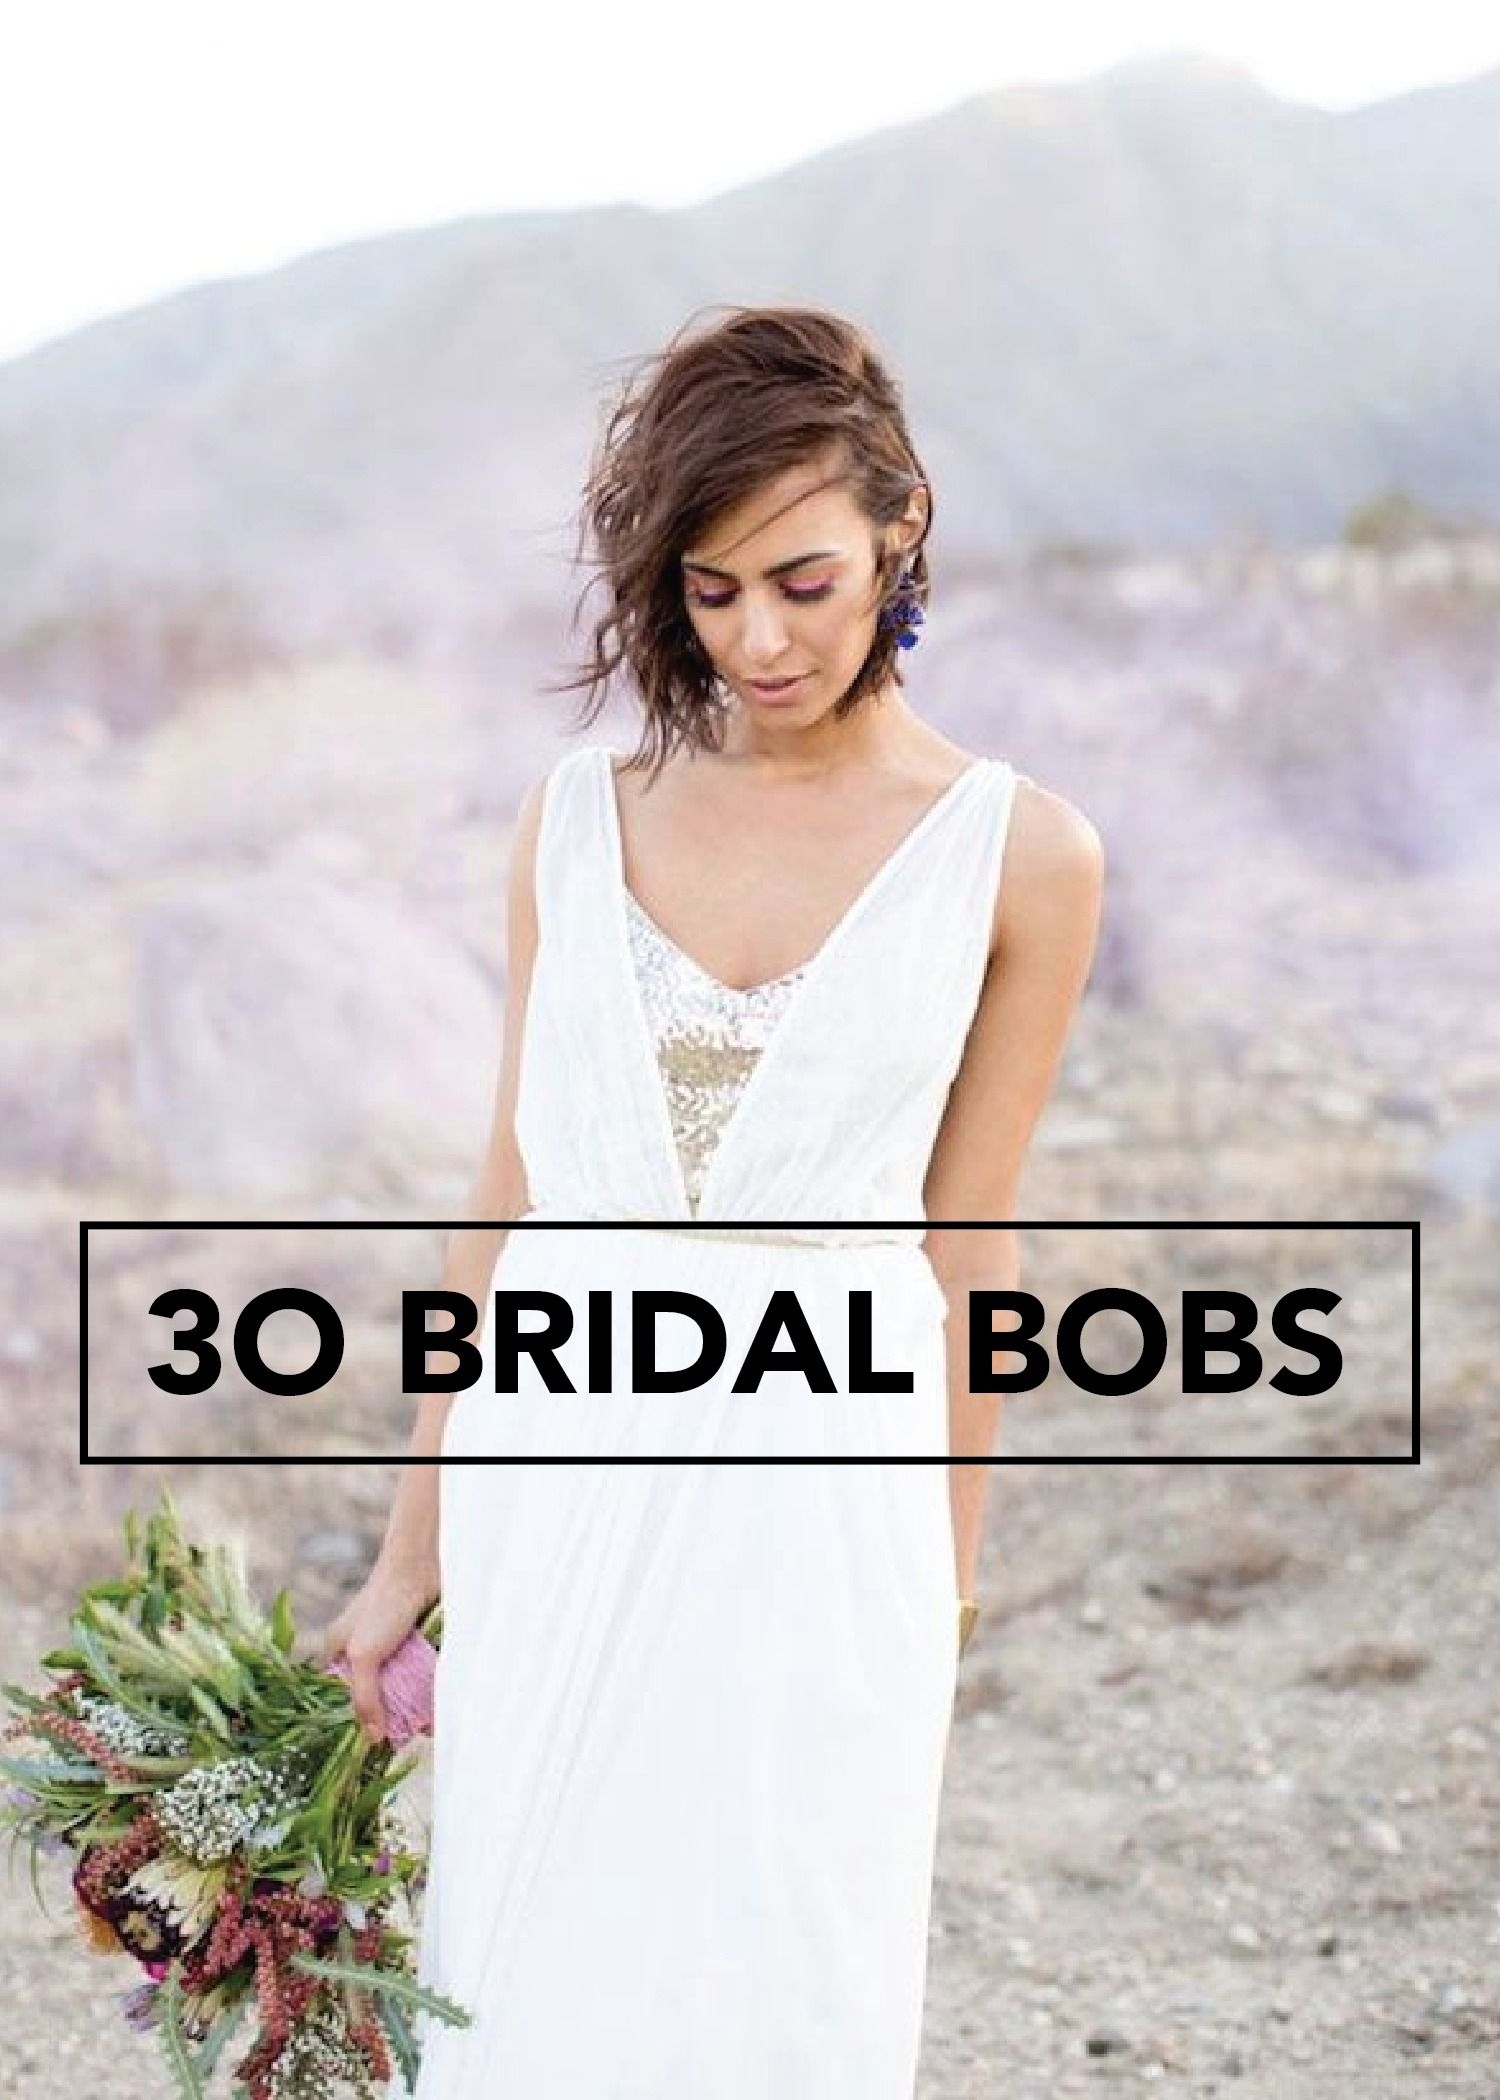 30 Ways To Style Short Hair For Your Wedding | Brilliant inside How To Wear A Wedding Veil With A Short Bob